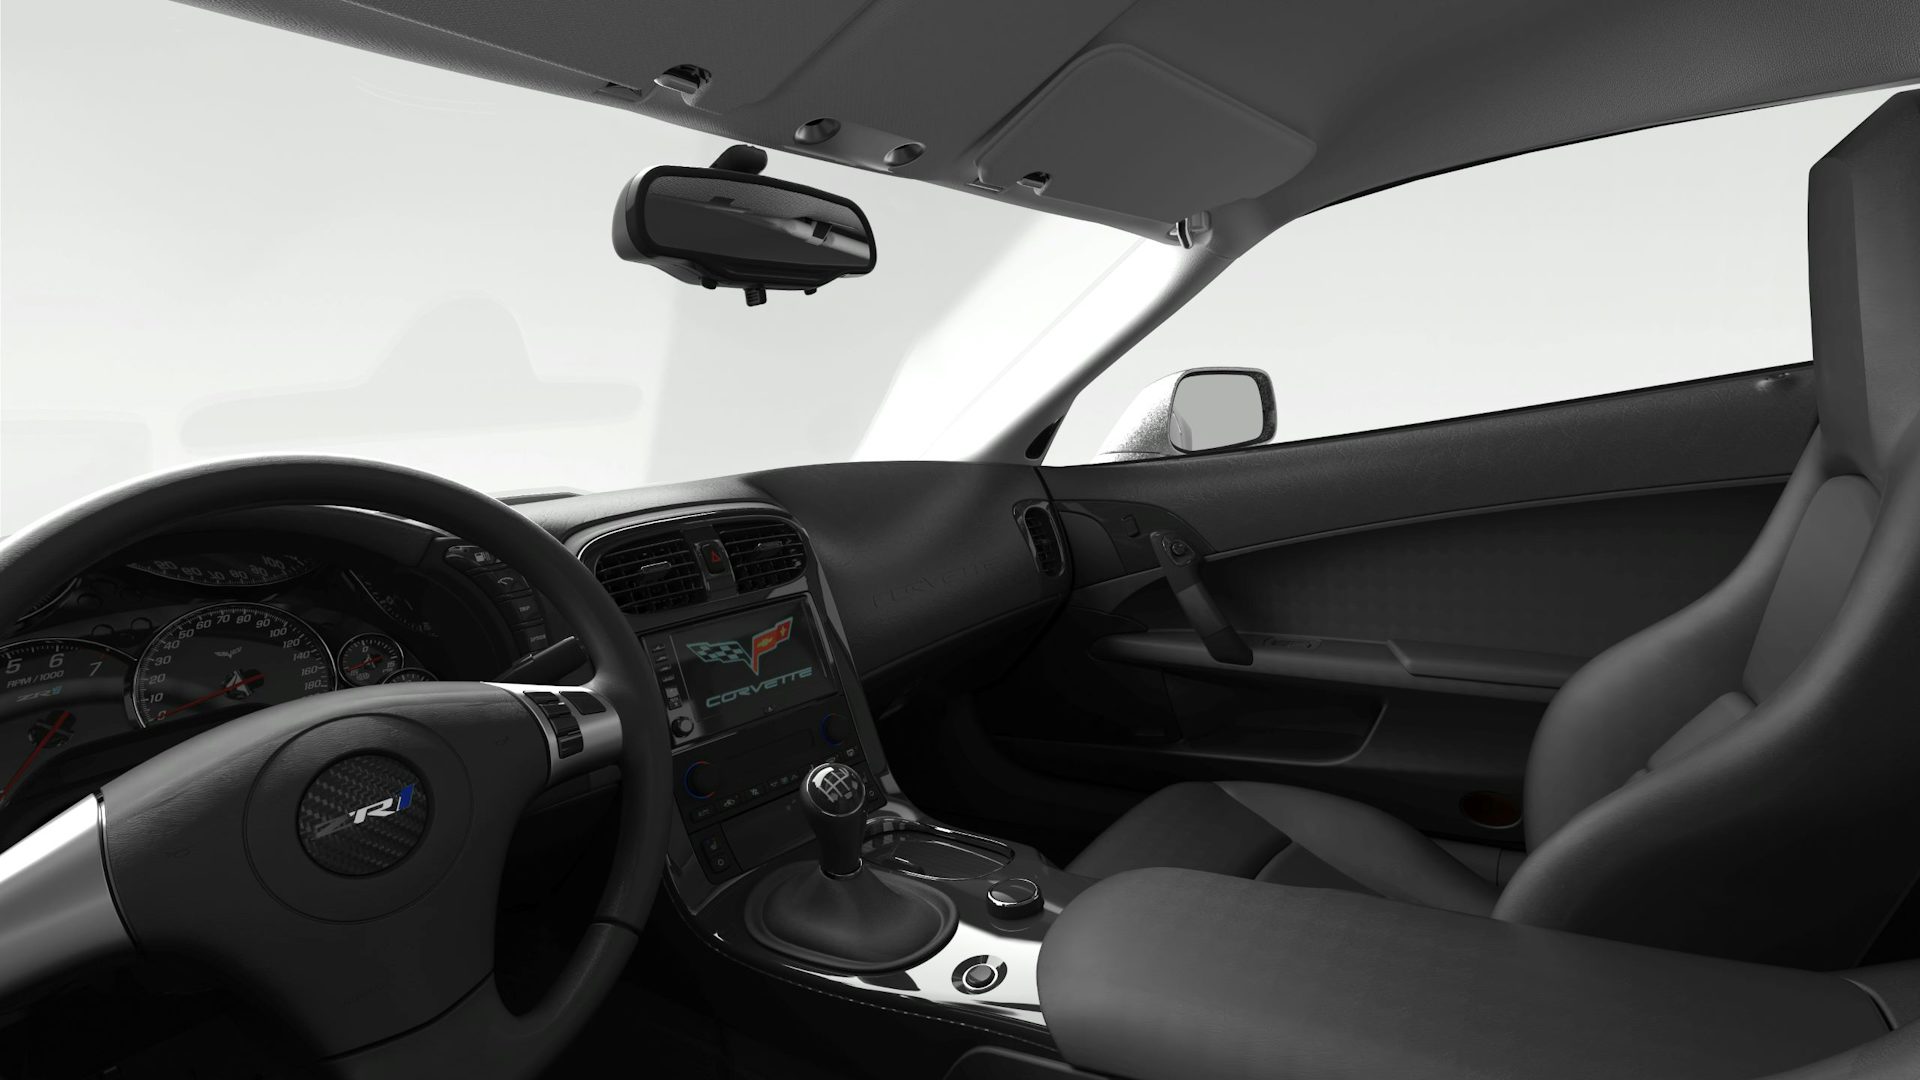 A rendering of the inside of a car designed with NX and Mastertrim